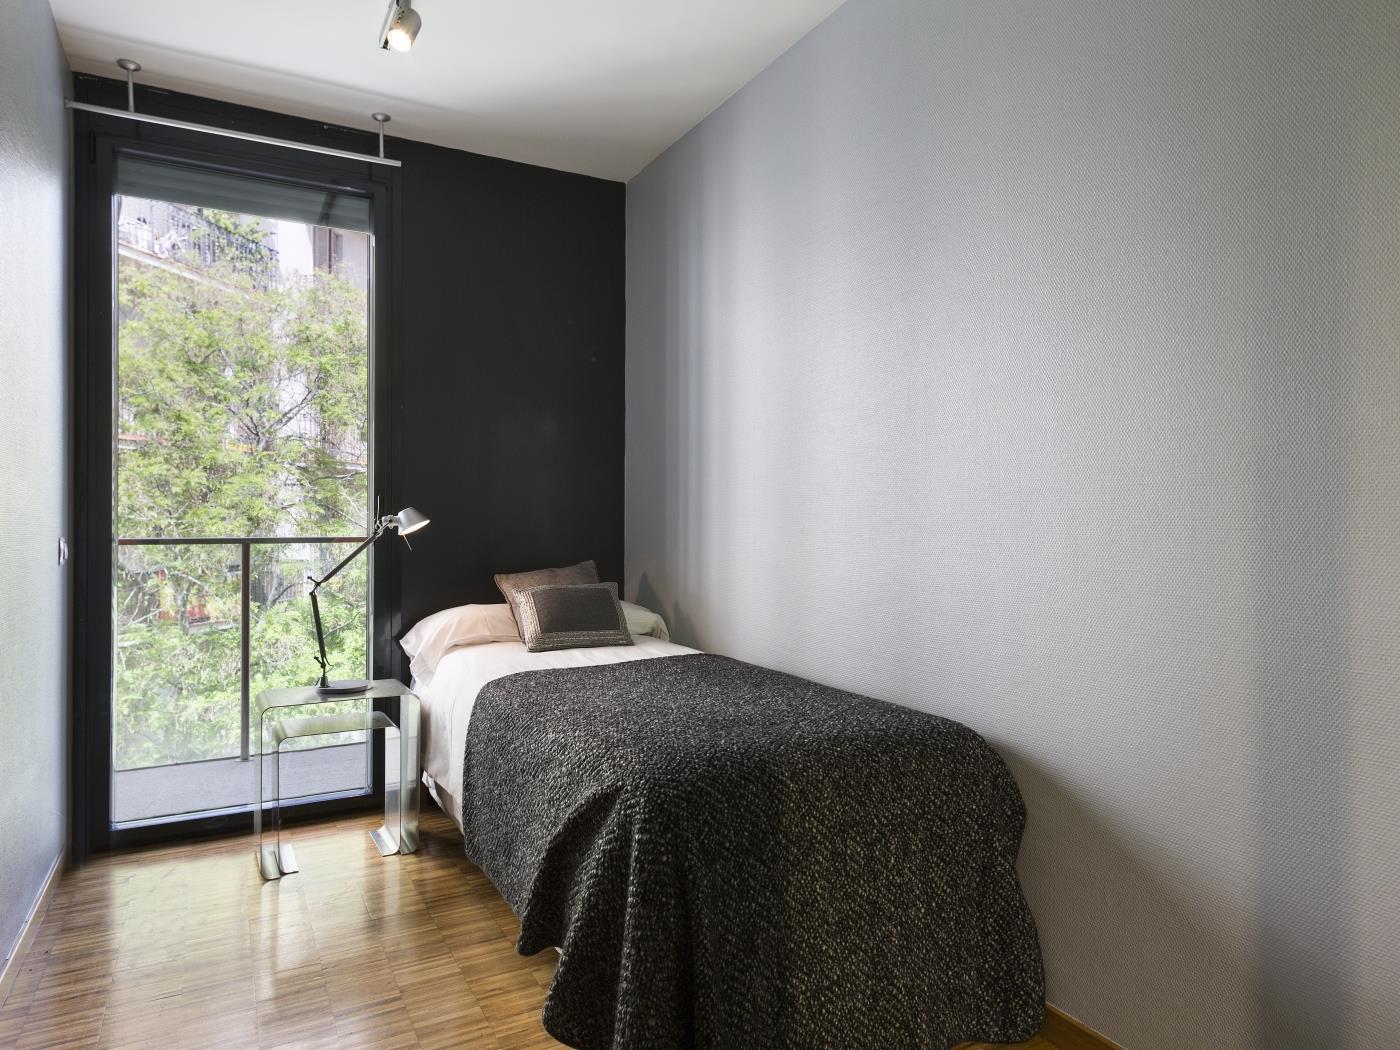 Executive Corporate Apartment Rentals in Barcelona for 6 - My Space barcelona Apartments